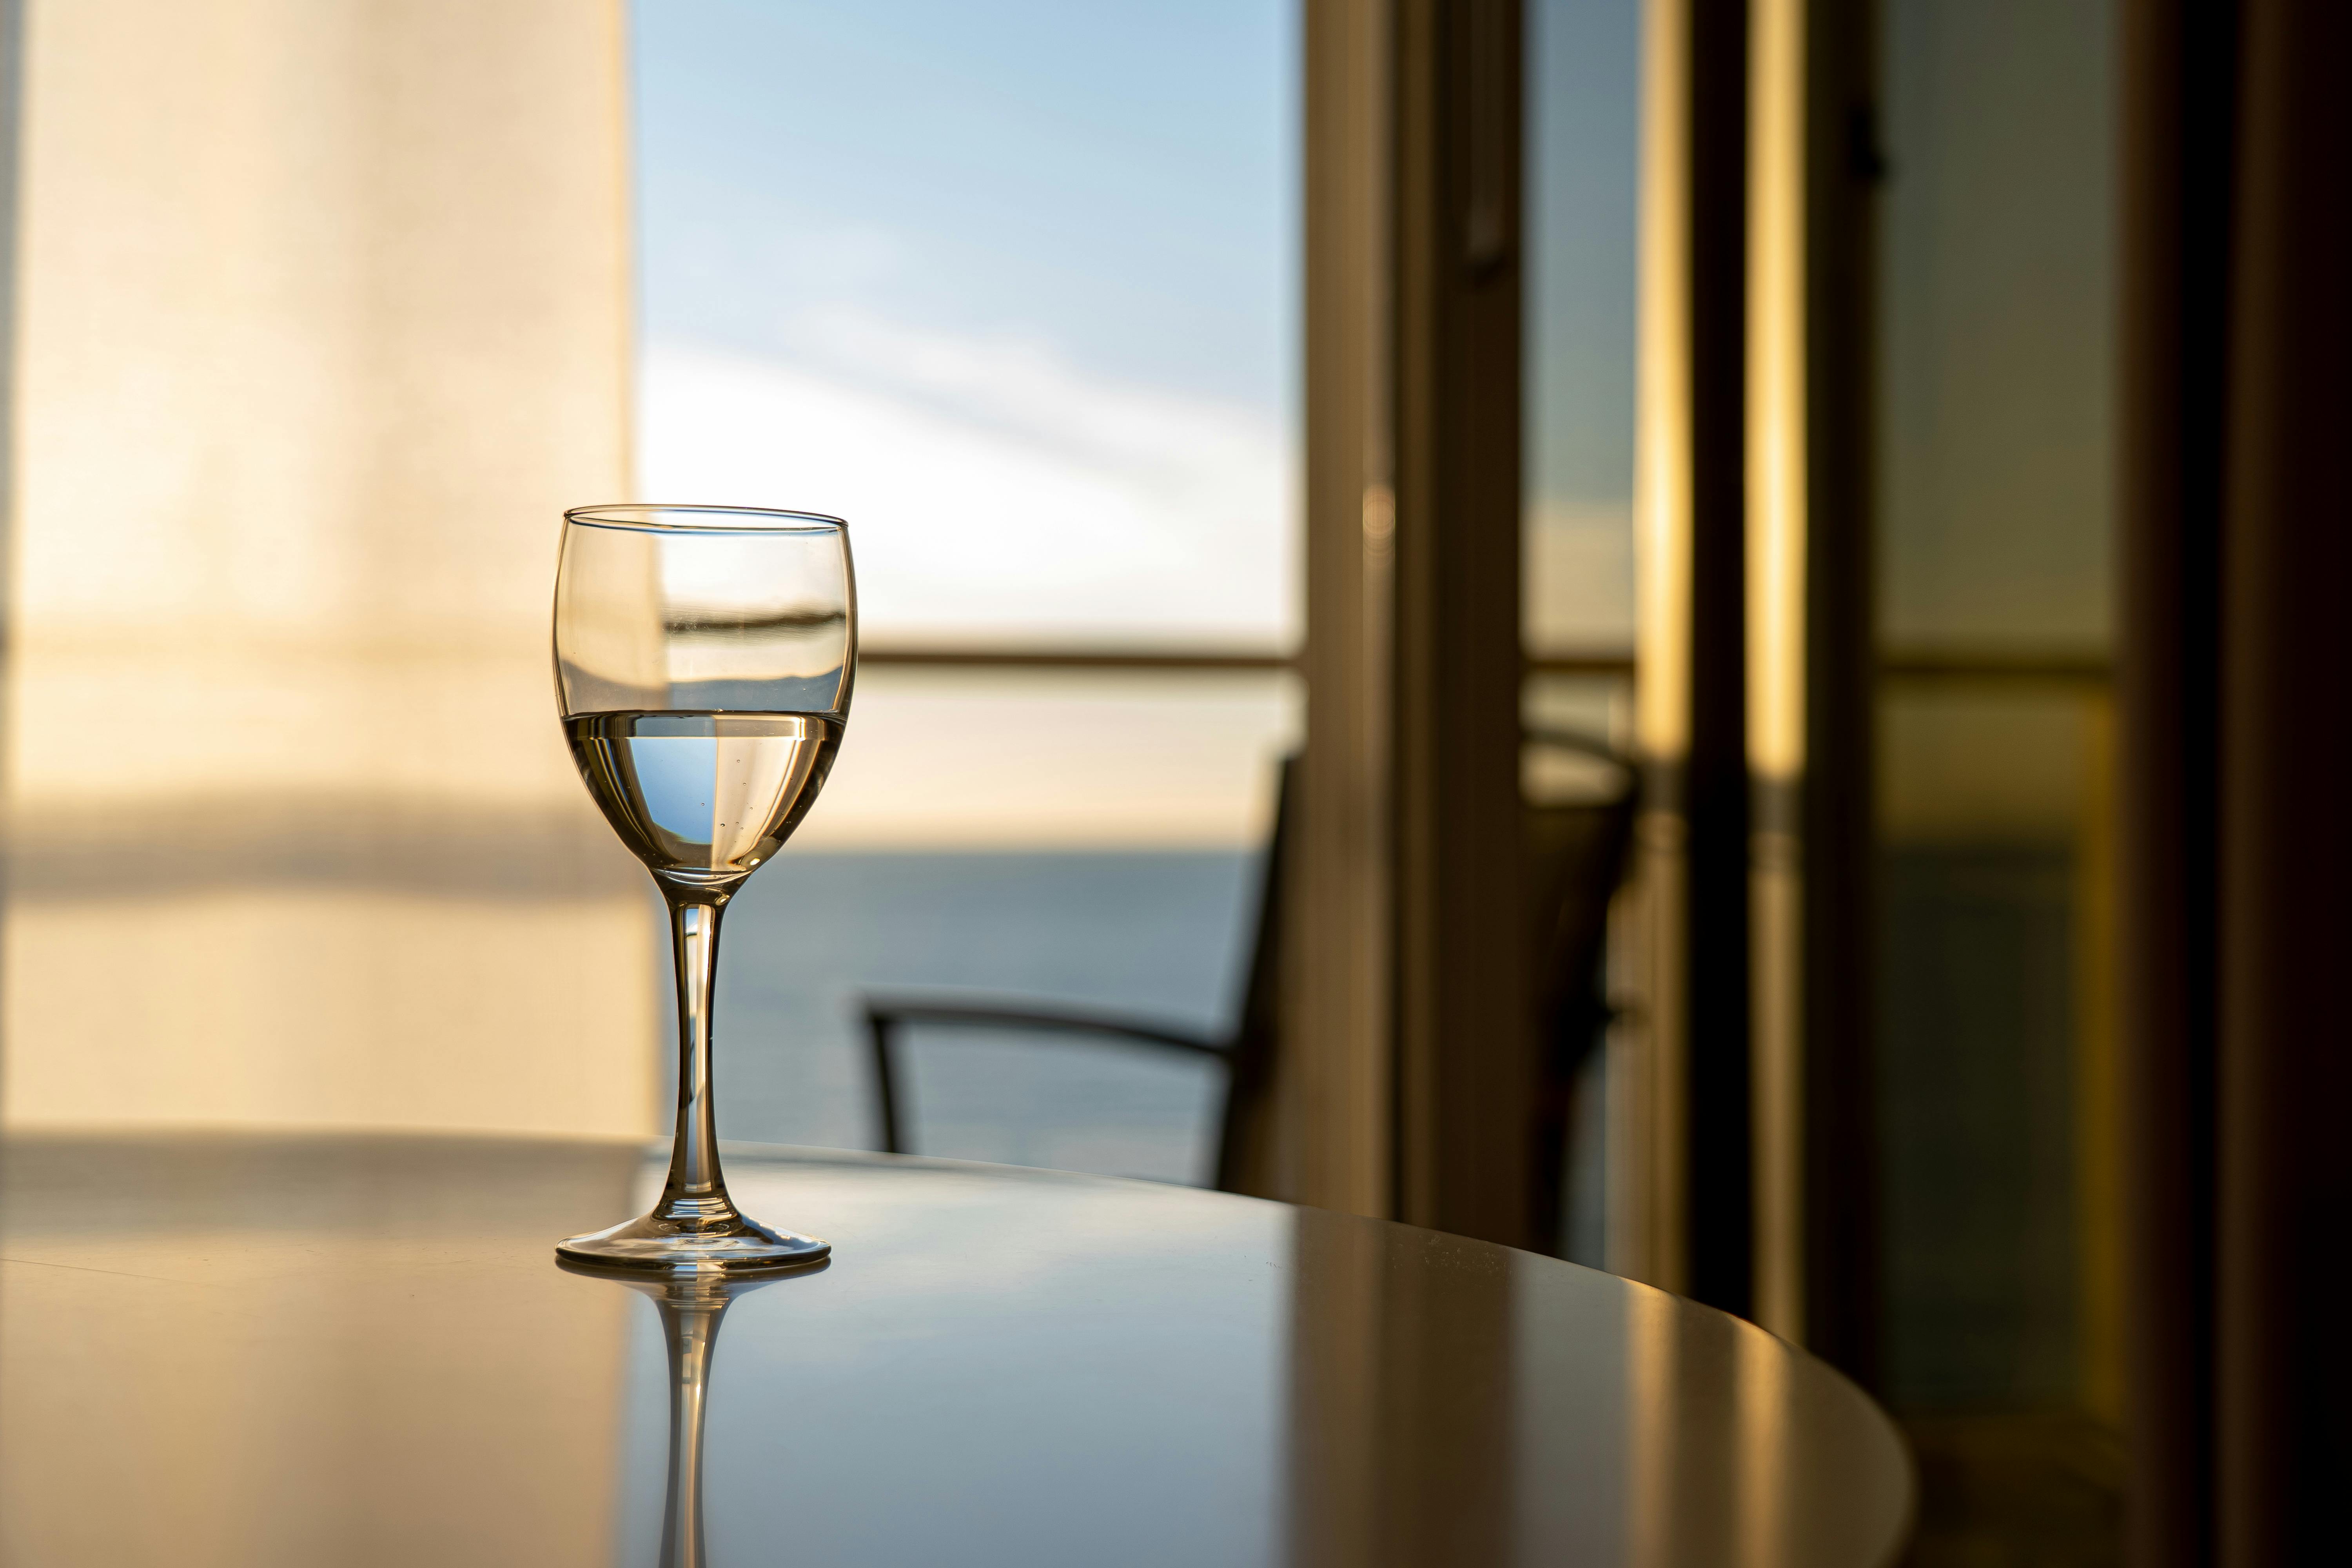 A wine glass on a dining table. | Photo: Pexels